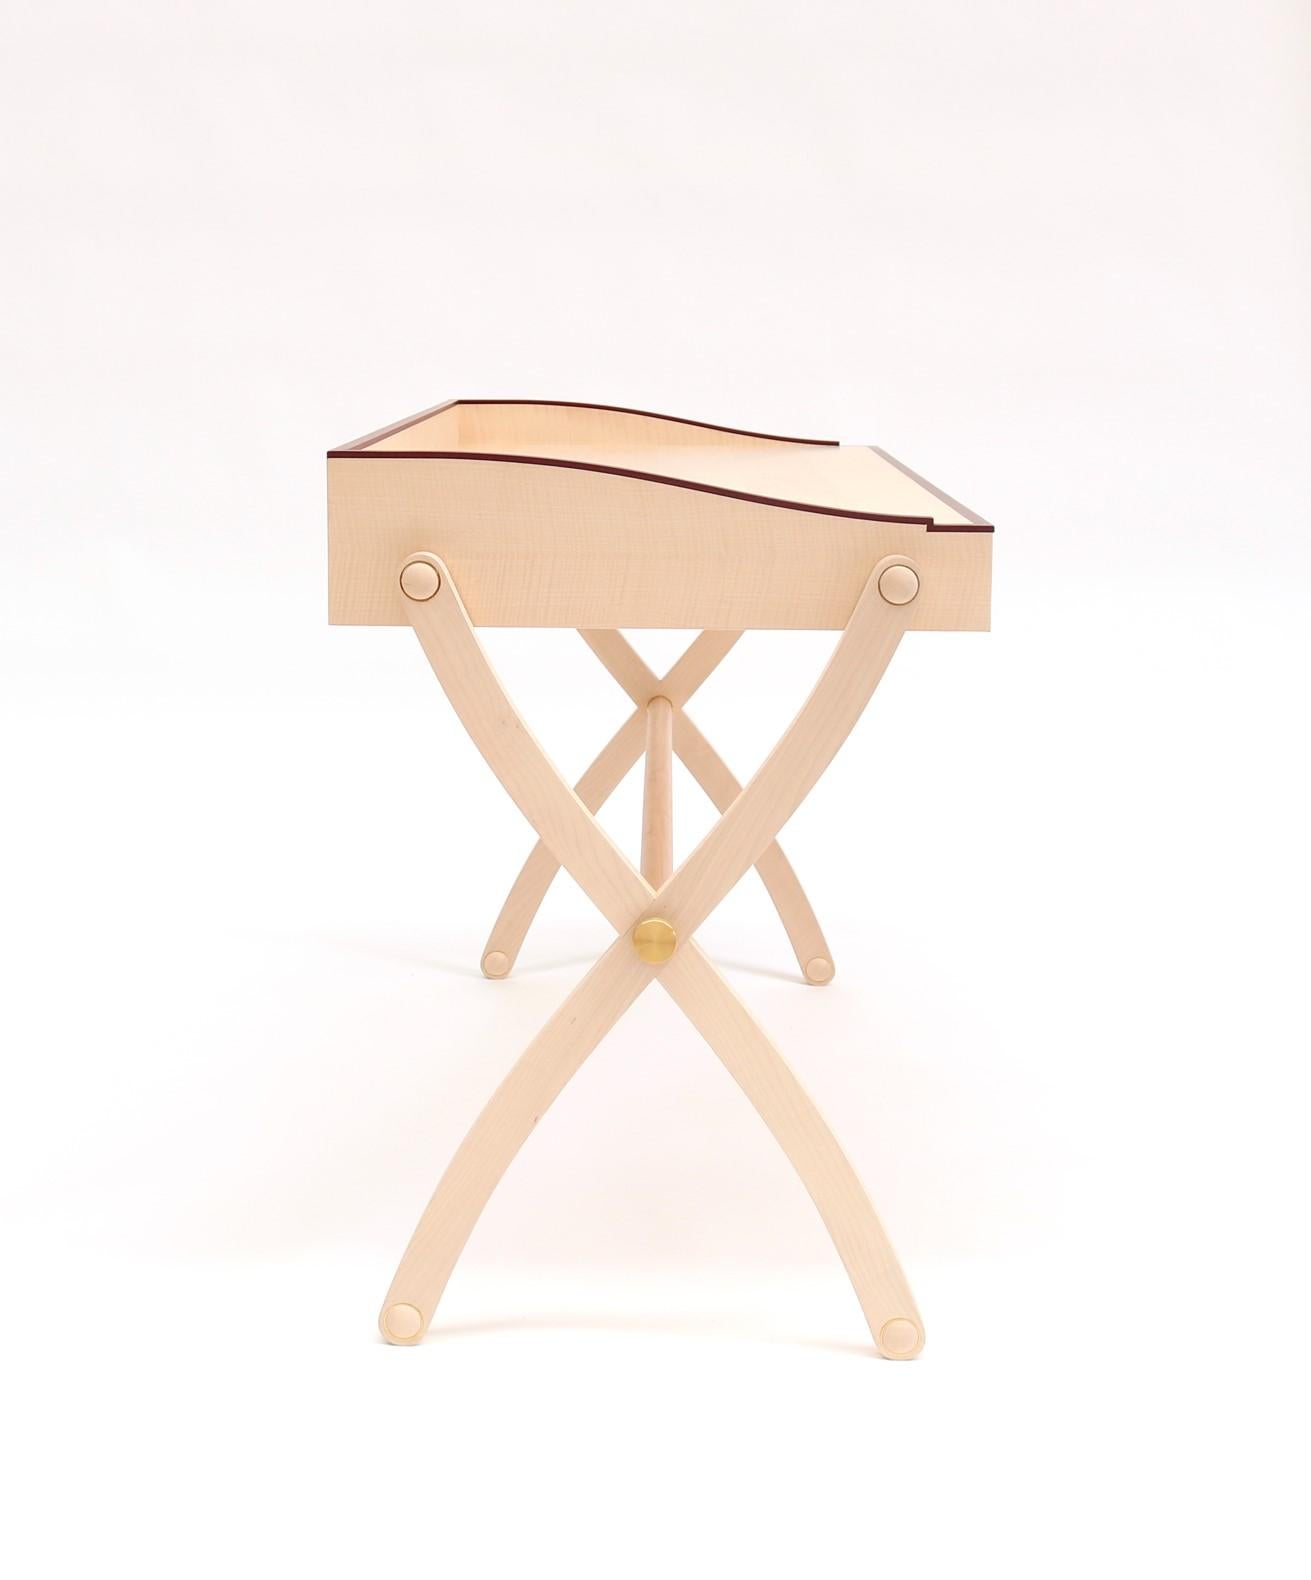 Marguerite is an elegant writing desk made of maple wood with a thin edging in amaranth wood. A pen tray made of amaranth wood is built on the top, closed by a rounded lid.
The writing desk has two drawers.
The cross legs are decorated with